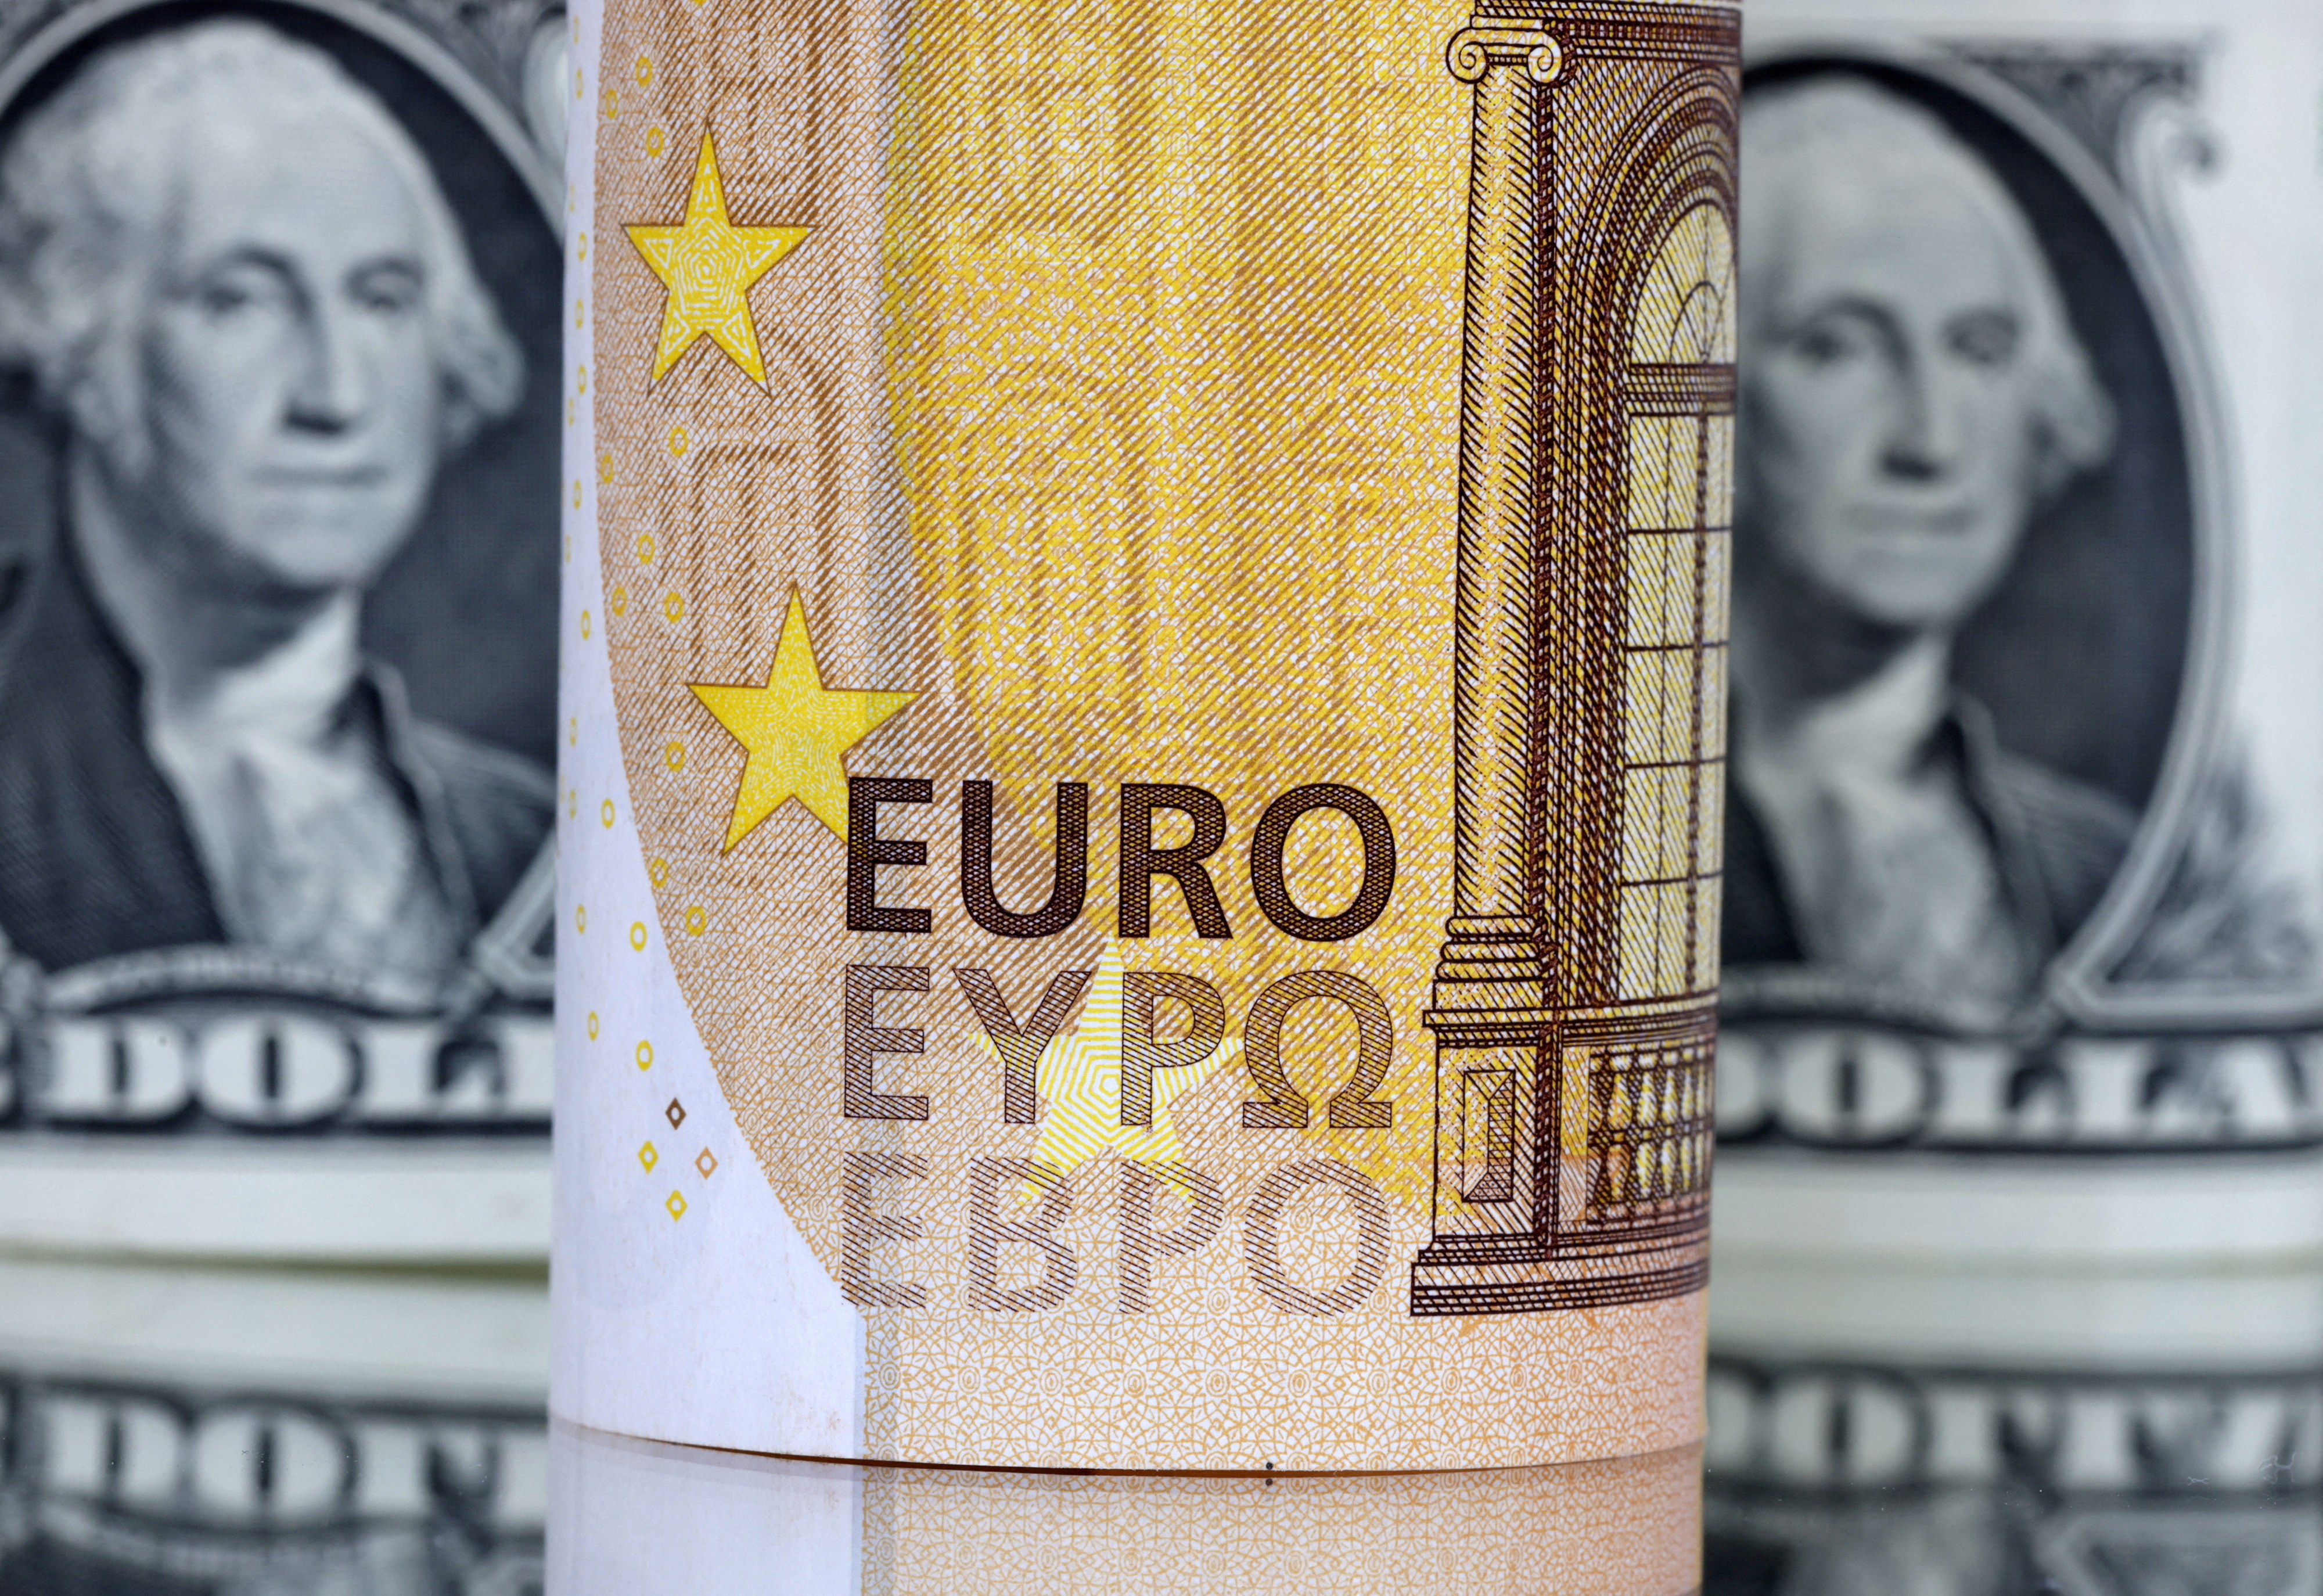 Euro extends fall to 12-year low as bond yields drop further